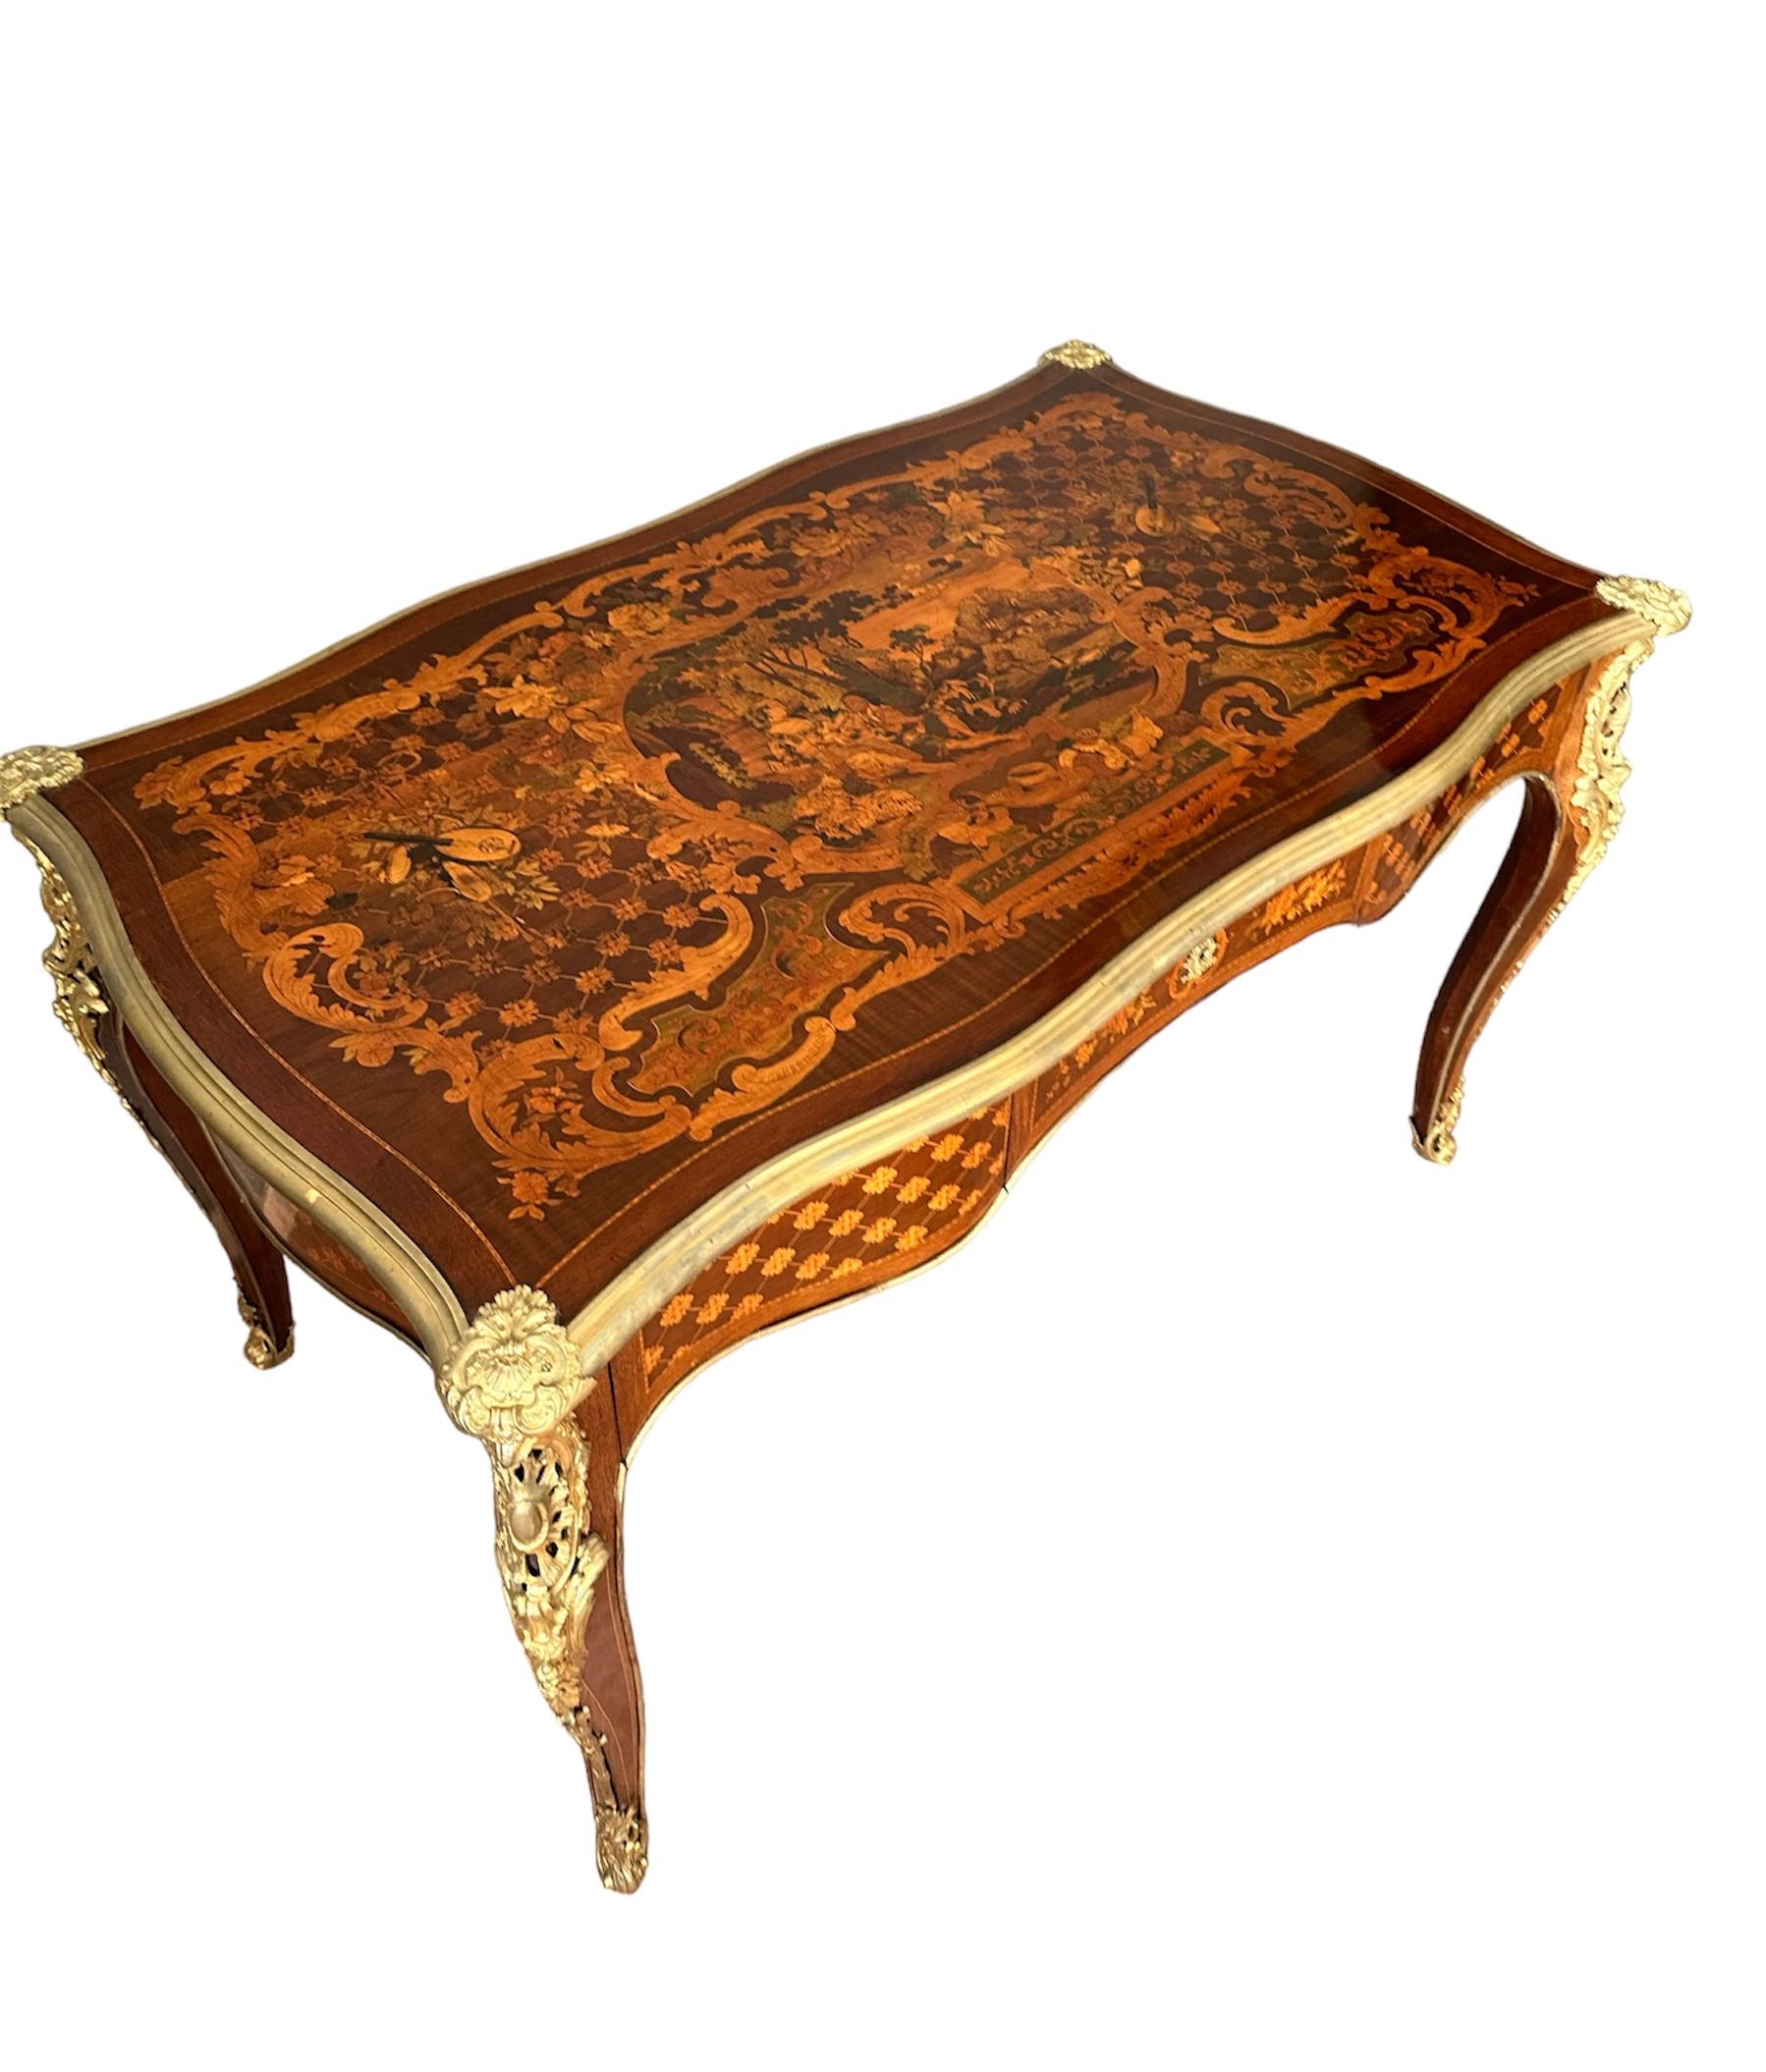 Elegant center desk, made of exotic wood and inlaid with various precious woods.

Entirely inlaid in every minimum detail, painstaking work made by a great 19th century cabinetmaker, Paul Sormani. The desk top has a crazy inlay that almost looks